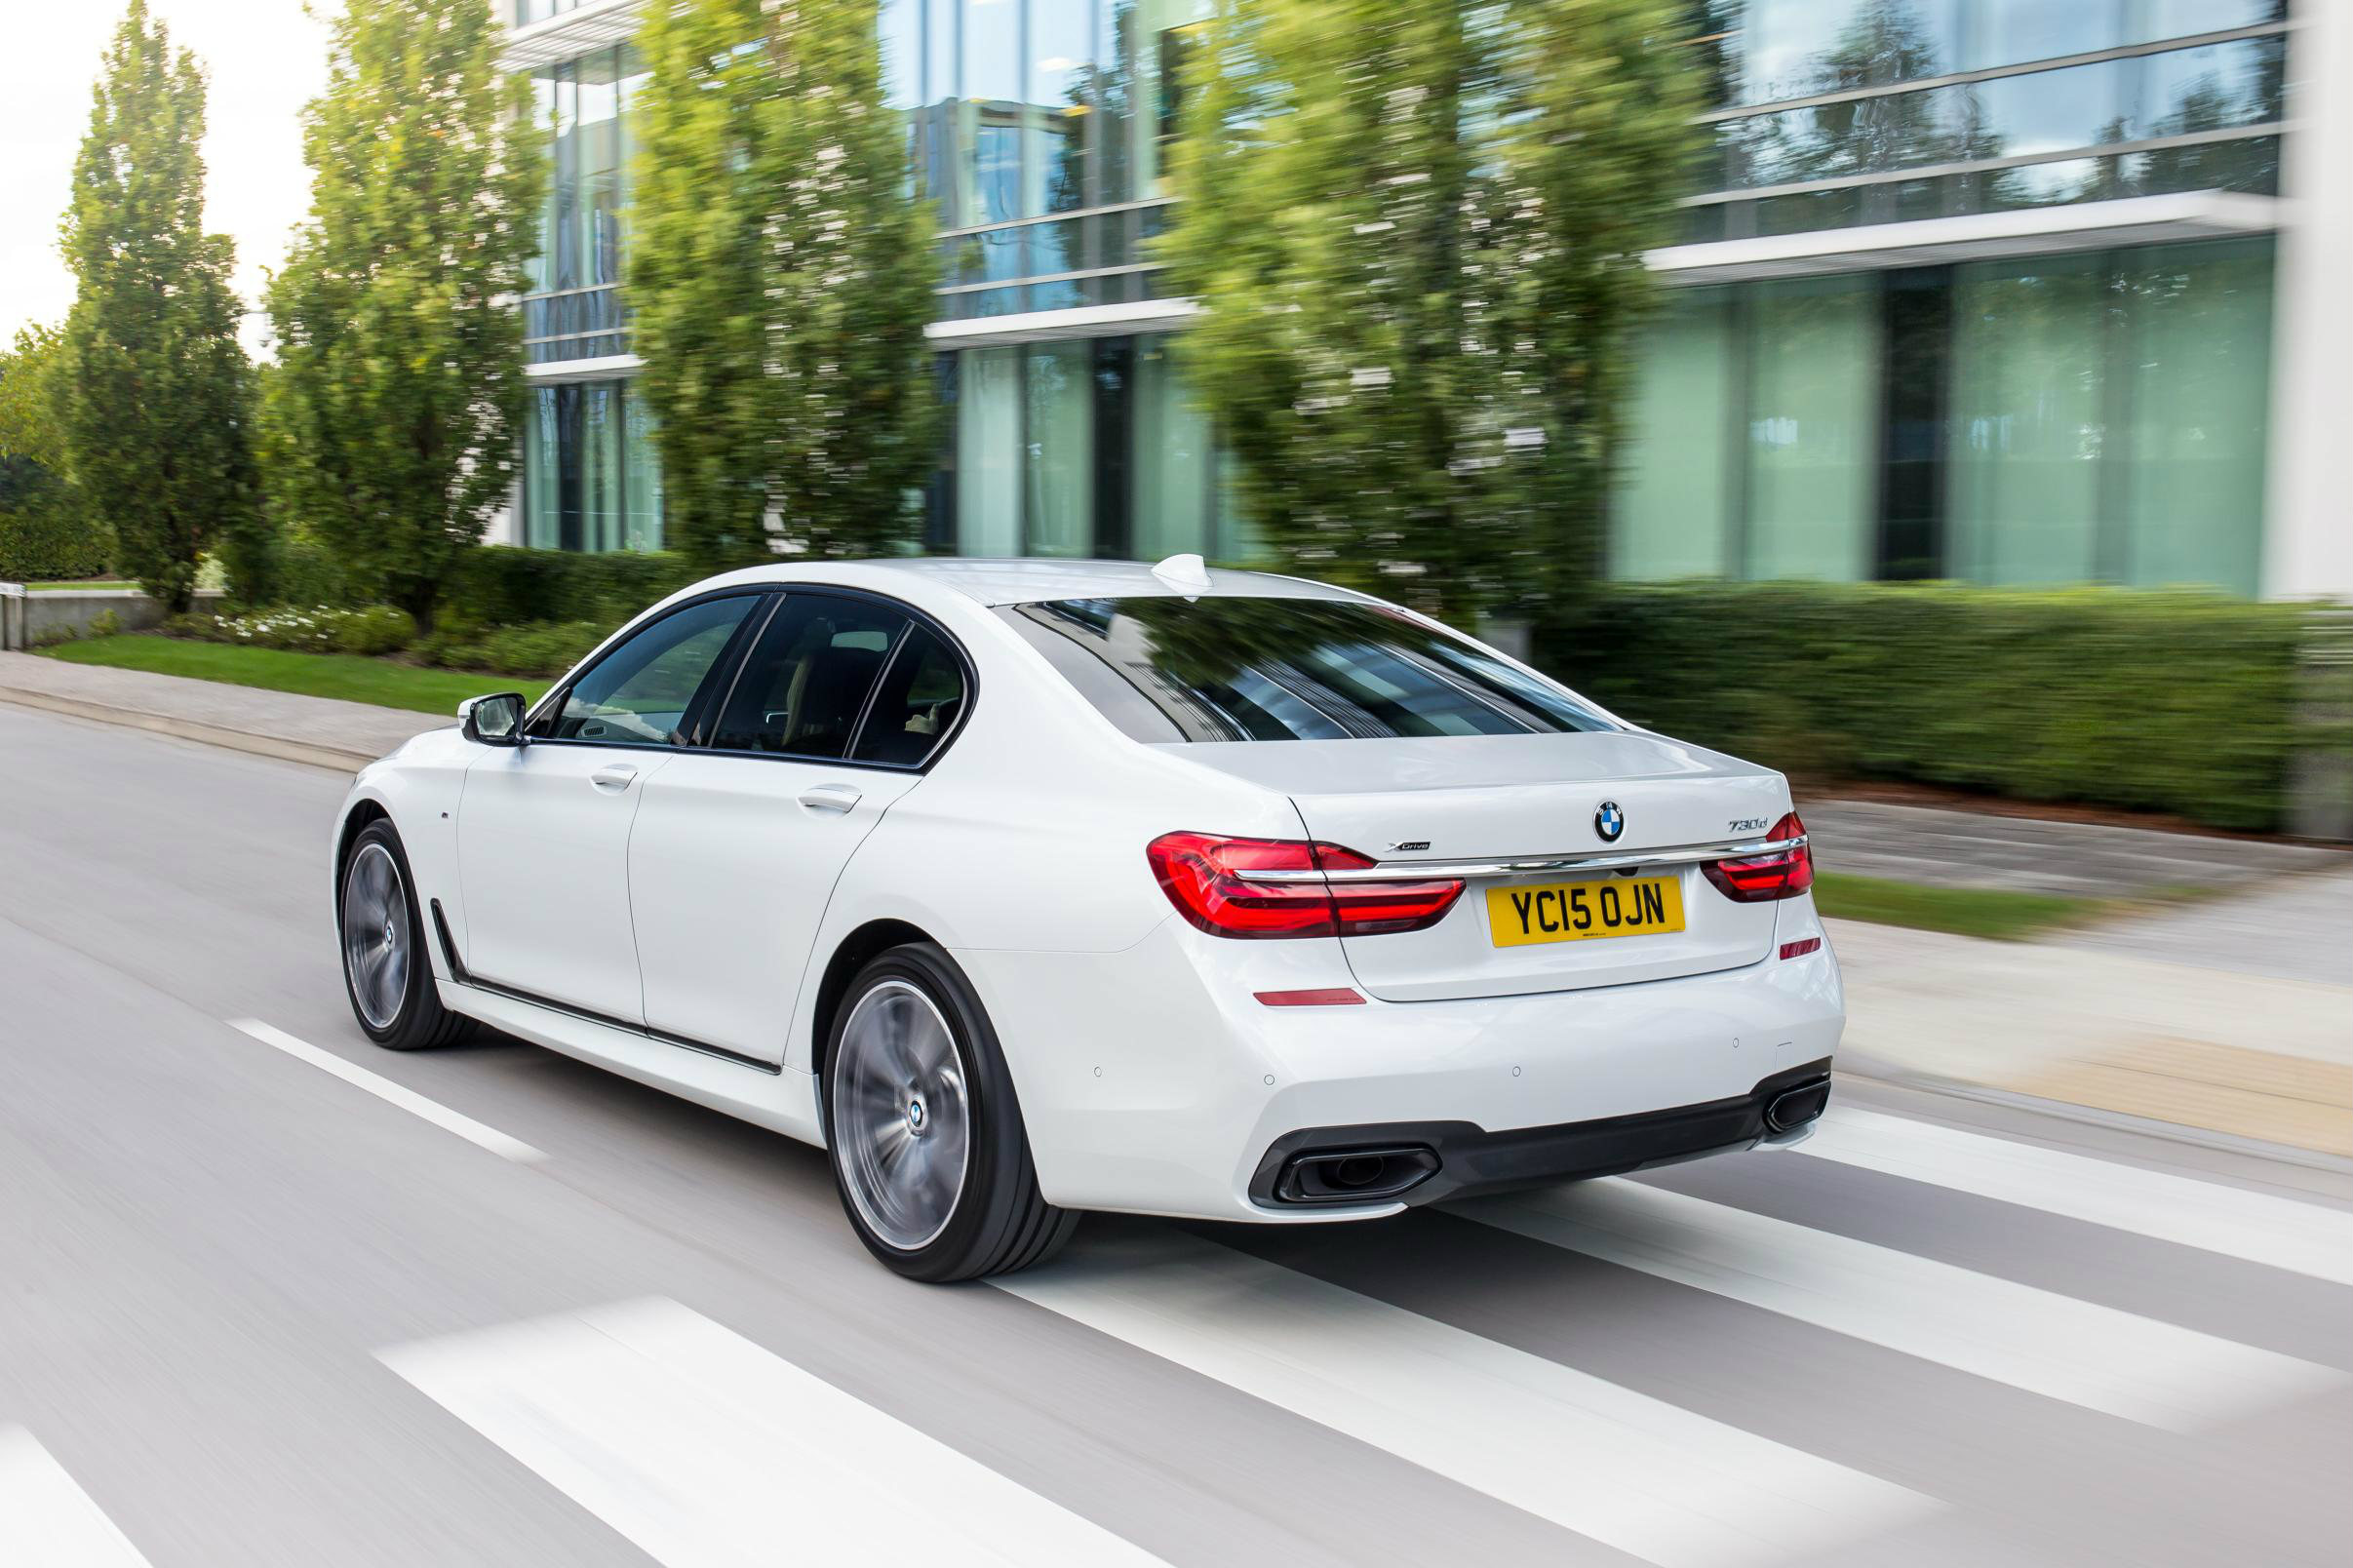 2016 BMW 7-series review by The Sunday Times Driving